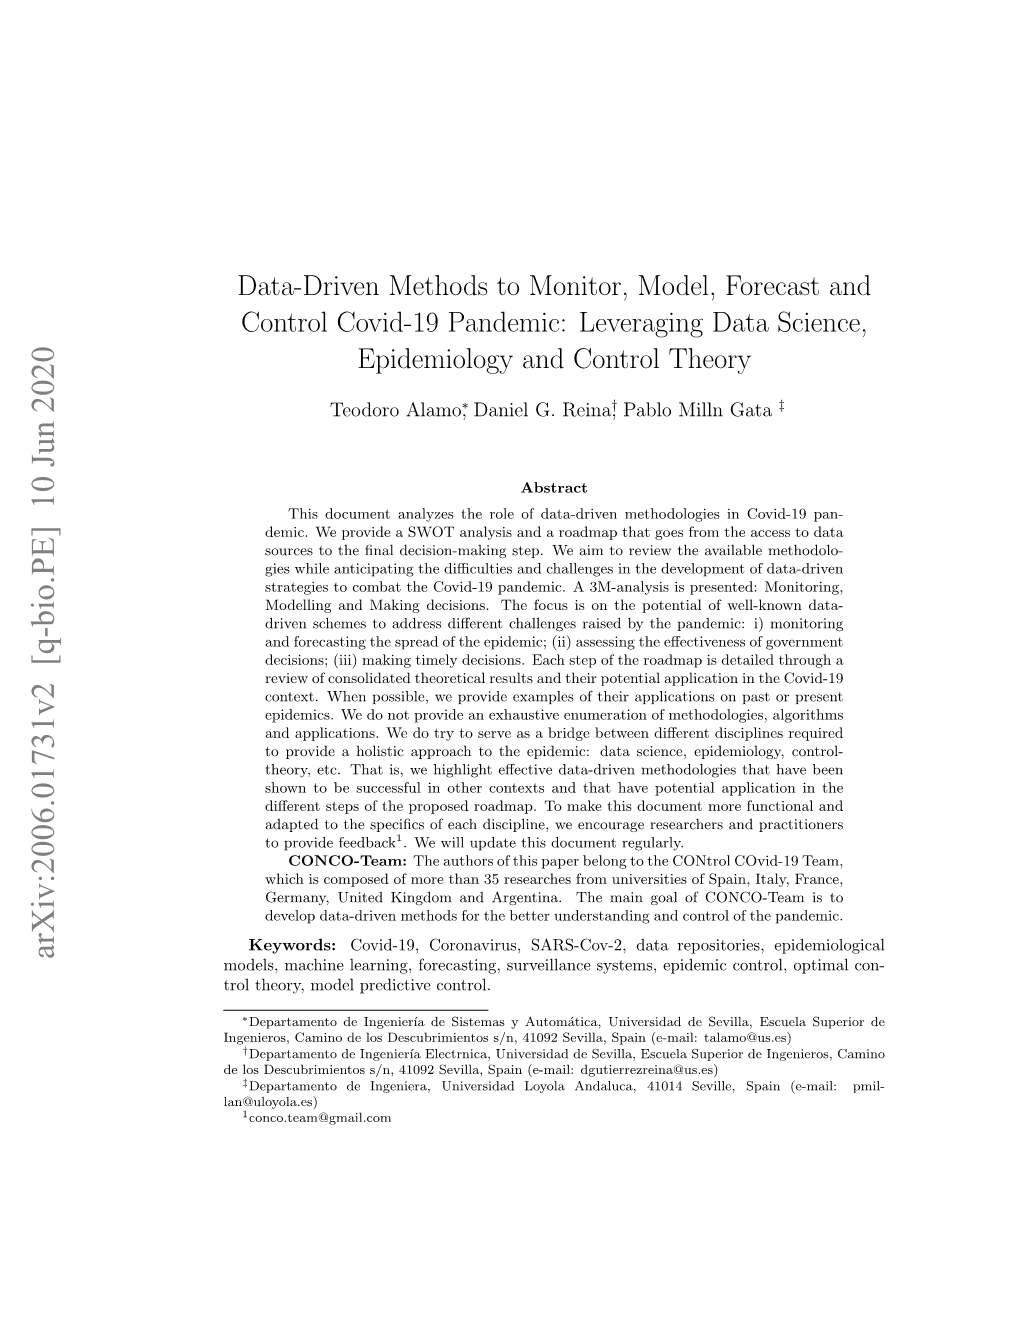 Data-Driven Methods to Monitor, Model, Forecast and Control Covid-19 Pandemic: Leveraging Data Science, Epidemiology and Control Theory